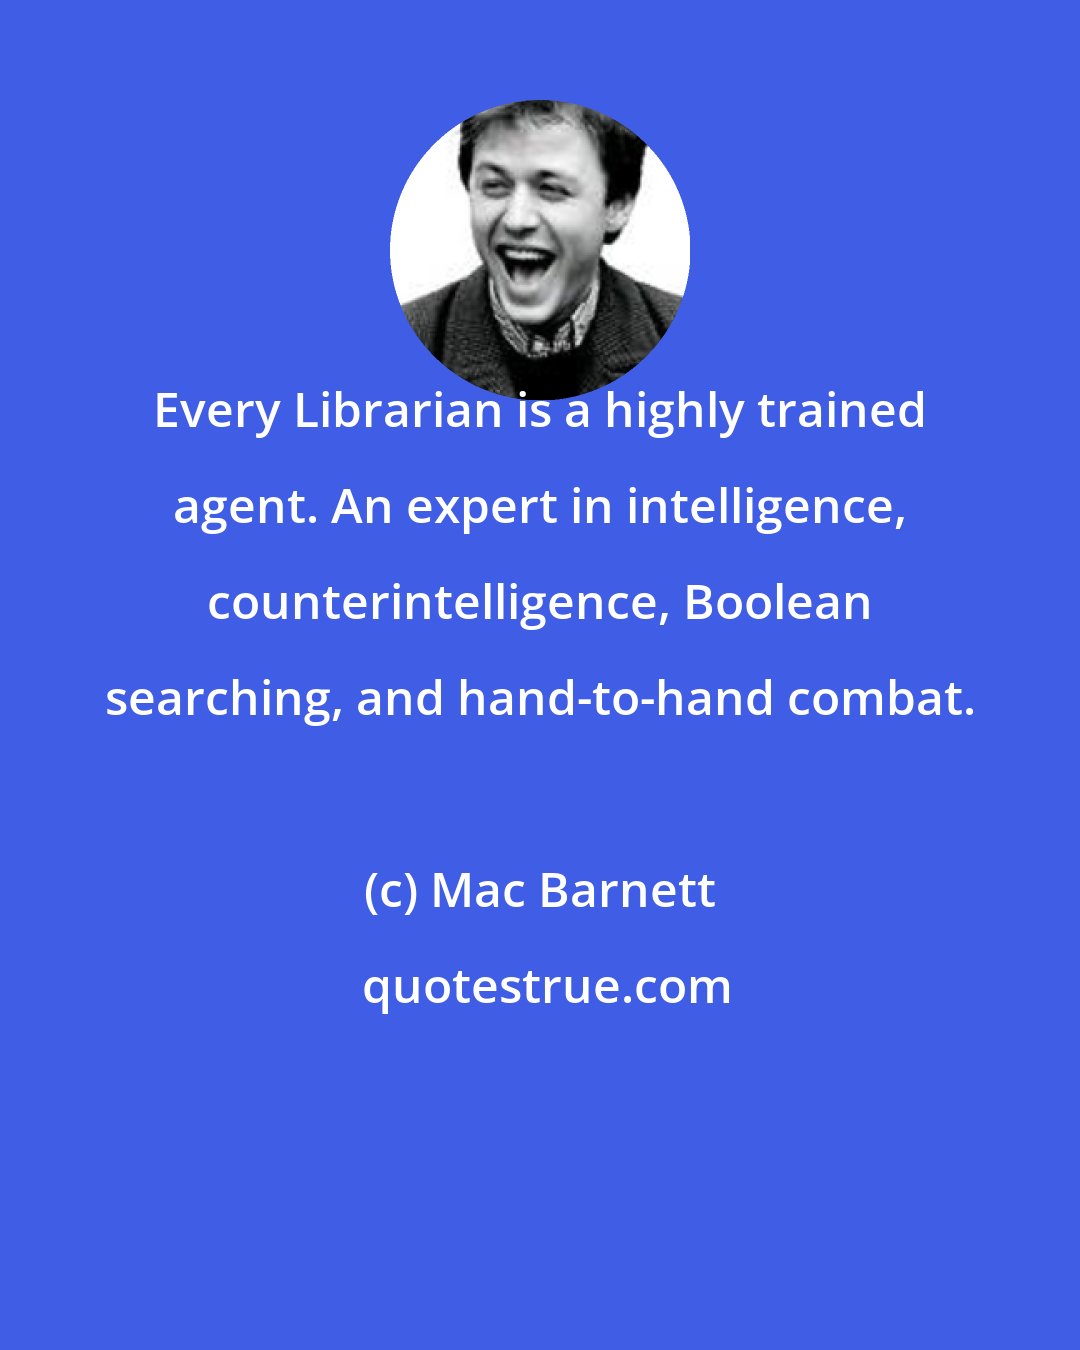 Mac Barnett: Every Librarian is a highly trained agent. An expert in intelligence, counterintelligence, Boolean searching, and hand-to-hand combat.